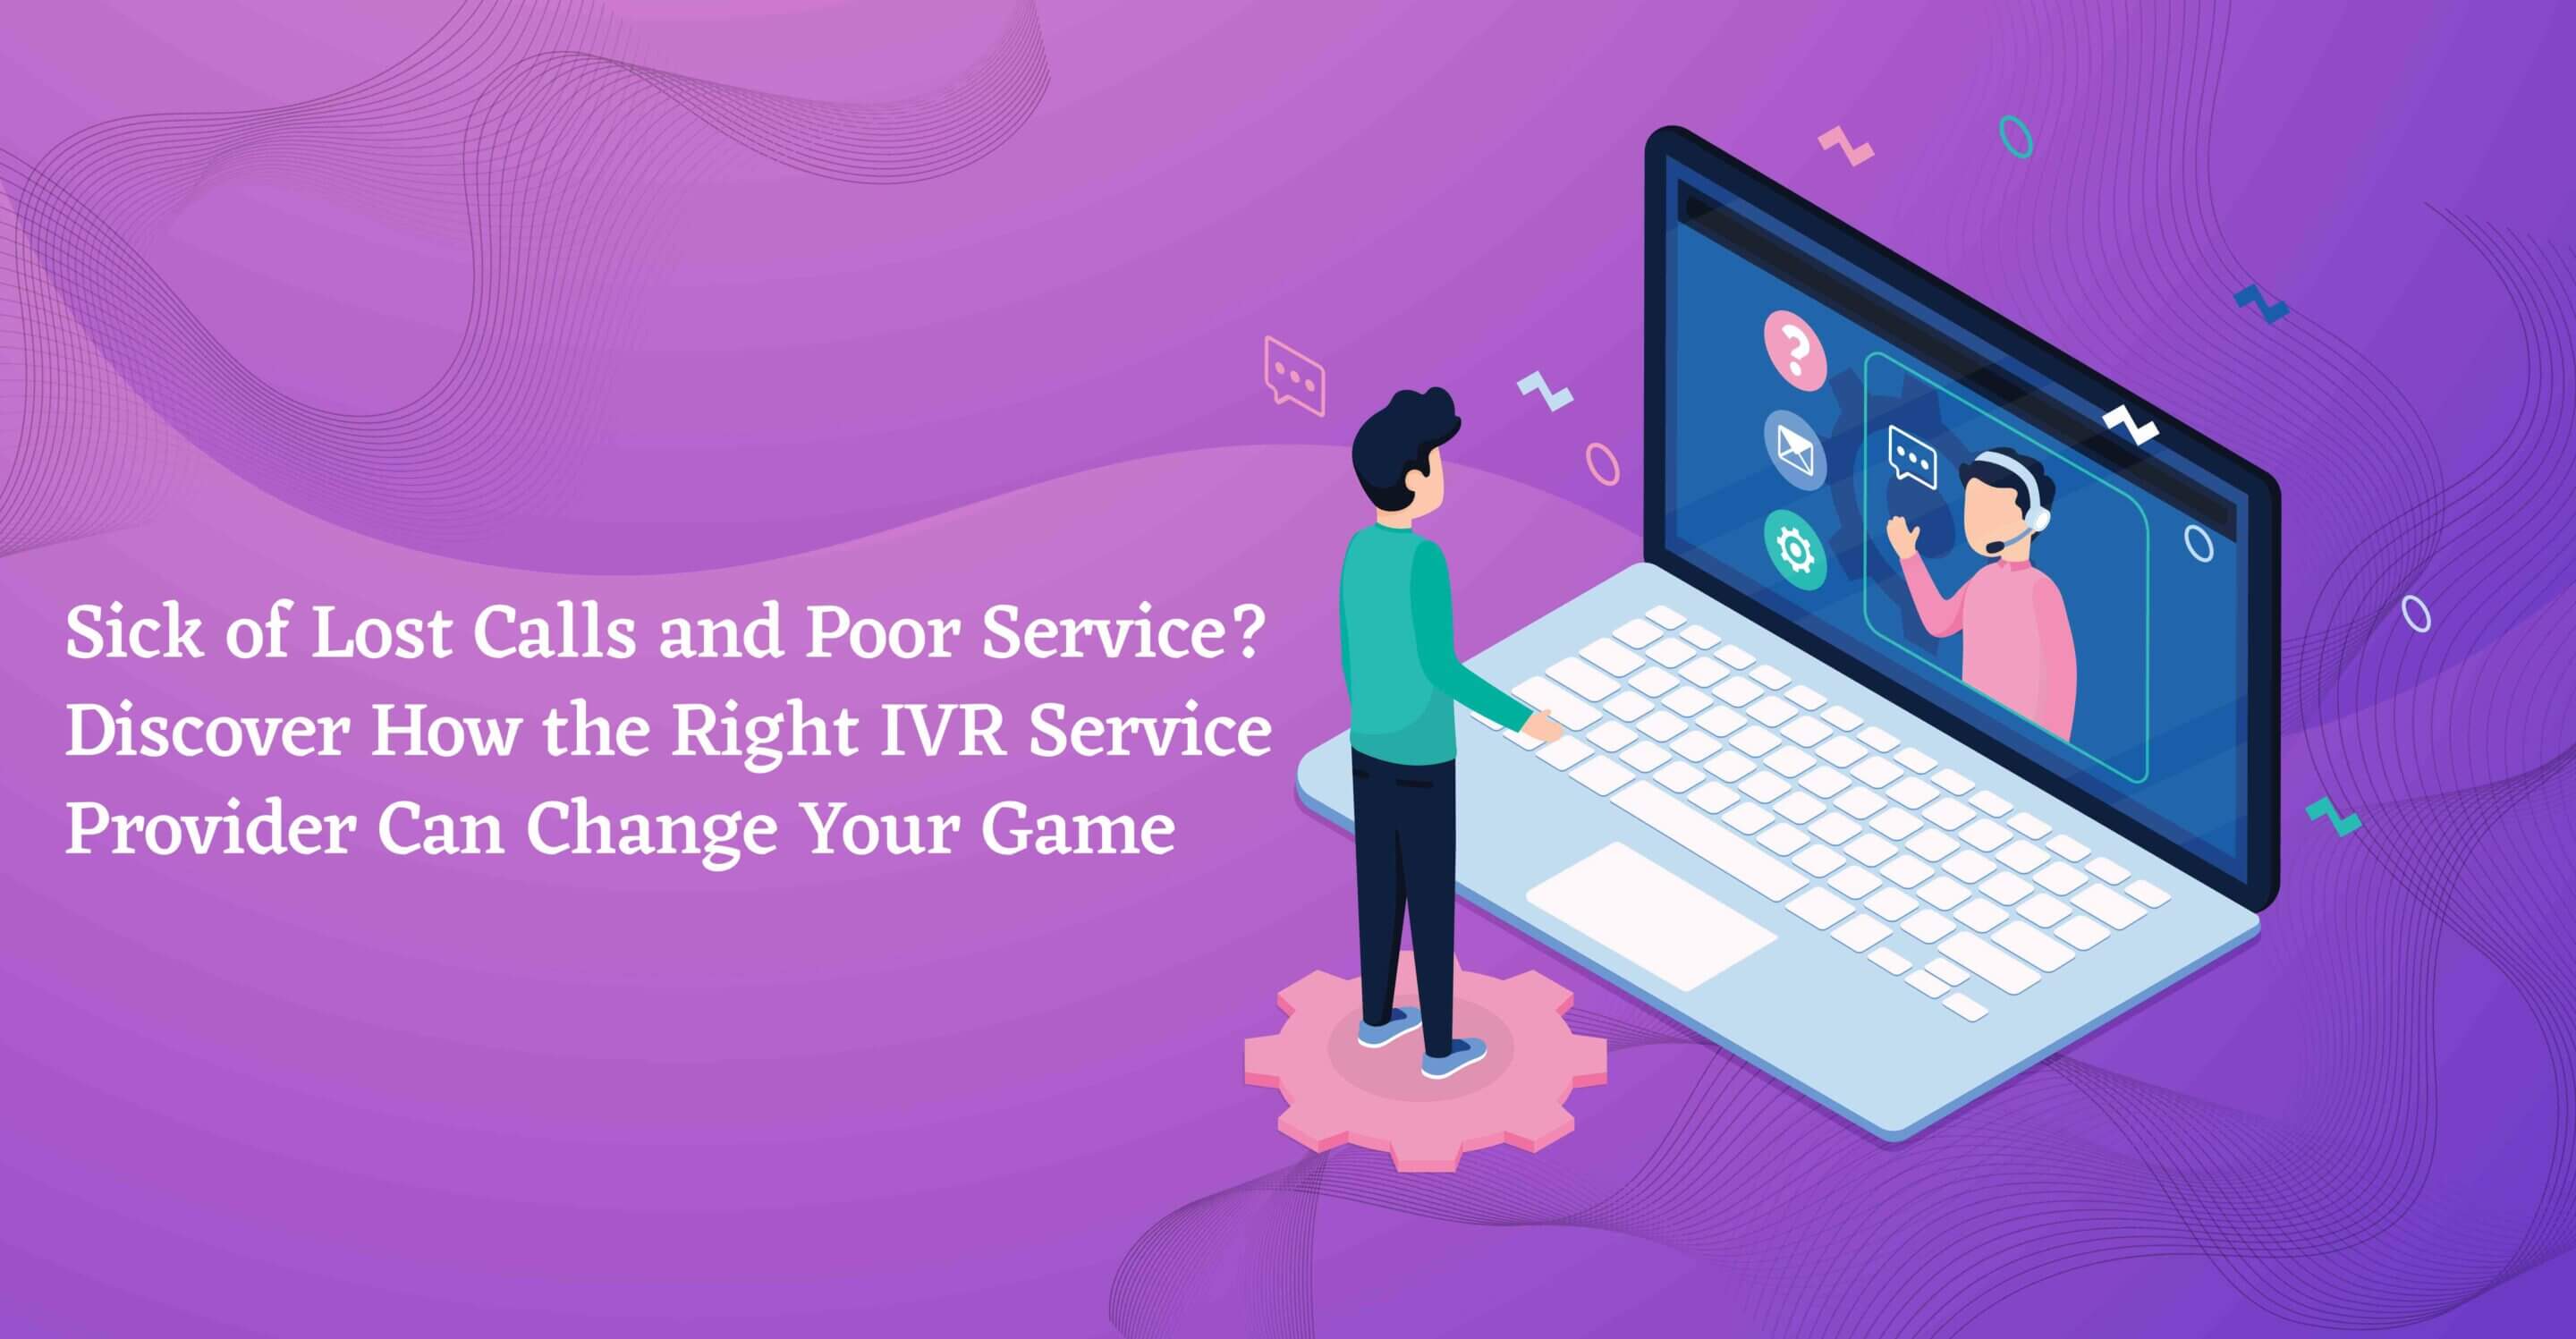 Sick of Lost Calls and Poor Service? Discover How the Right IVR Service Provider Can Change Your Game